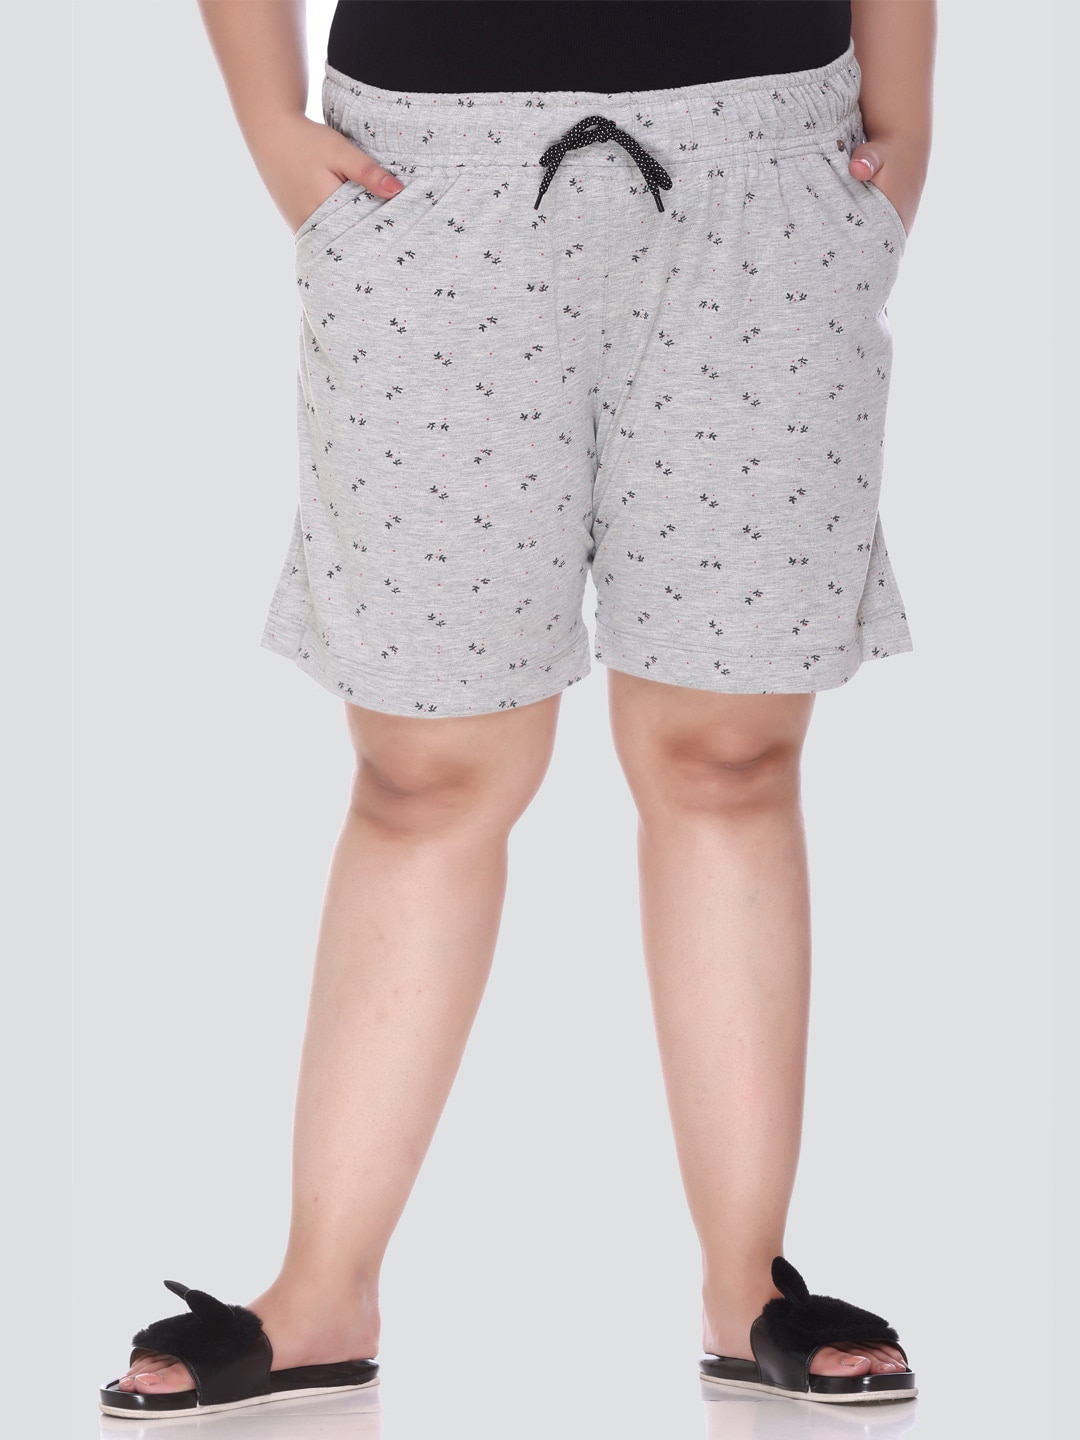 CUPID Plus Size Women Grey & Pink Printed Lounge Shorts Price in India